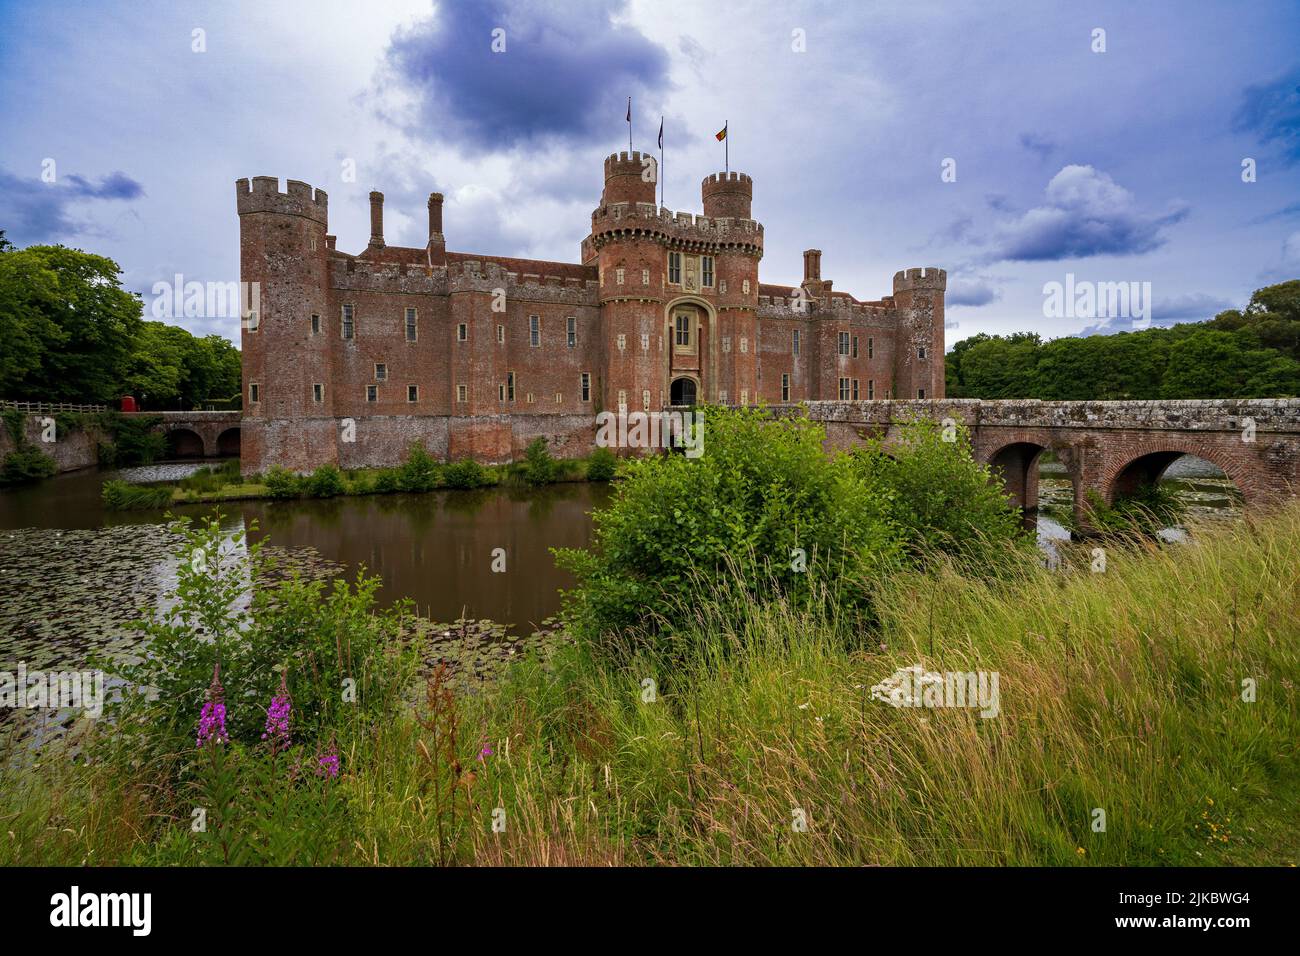 Castello di Herstmonceux, Herstmonceux, East Sussex, Inghilterra, Regno Unito Foto Stock